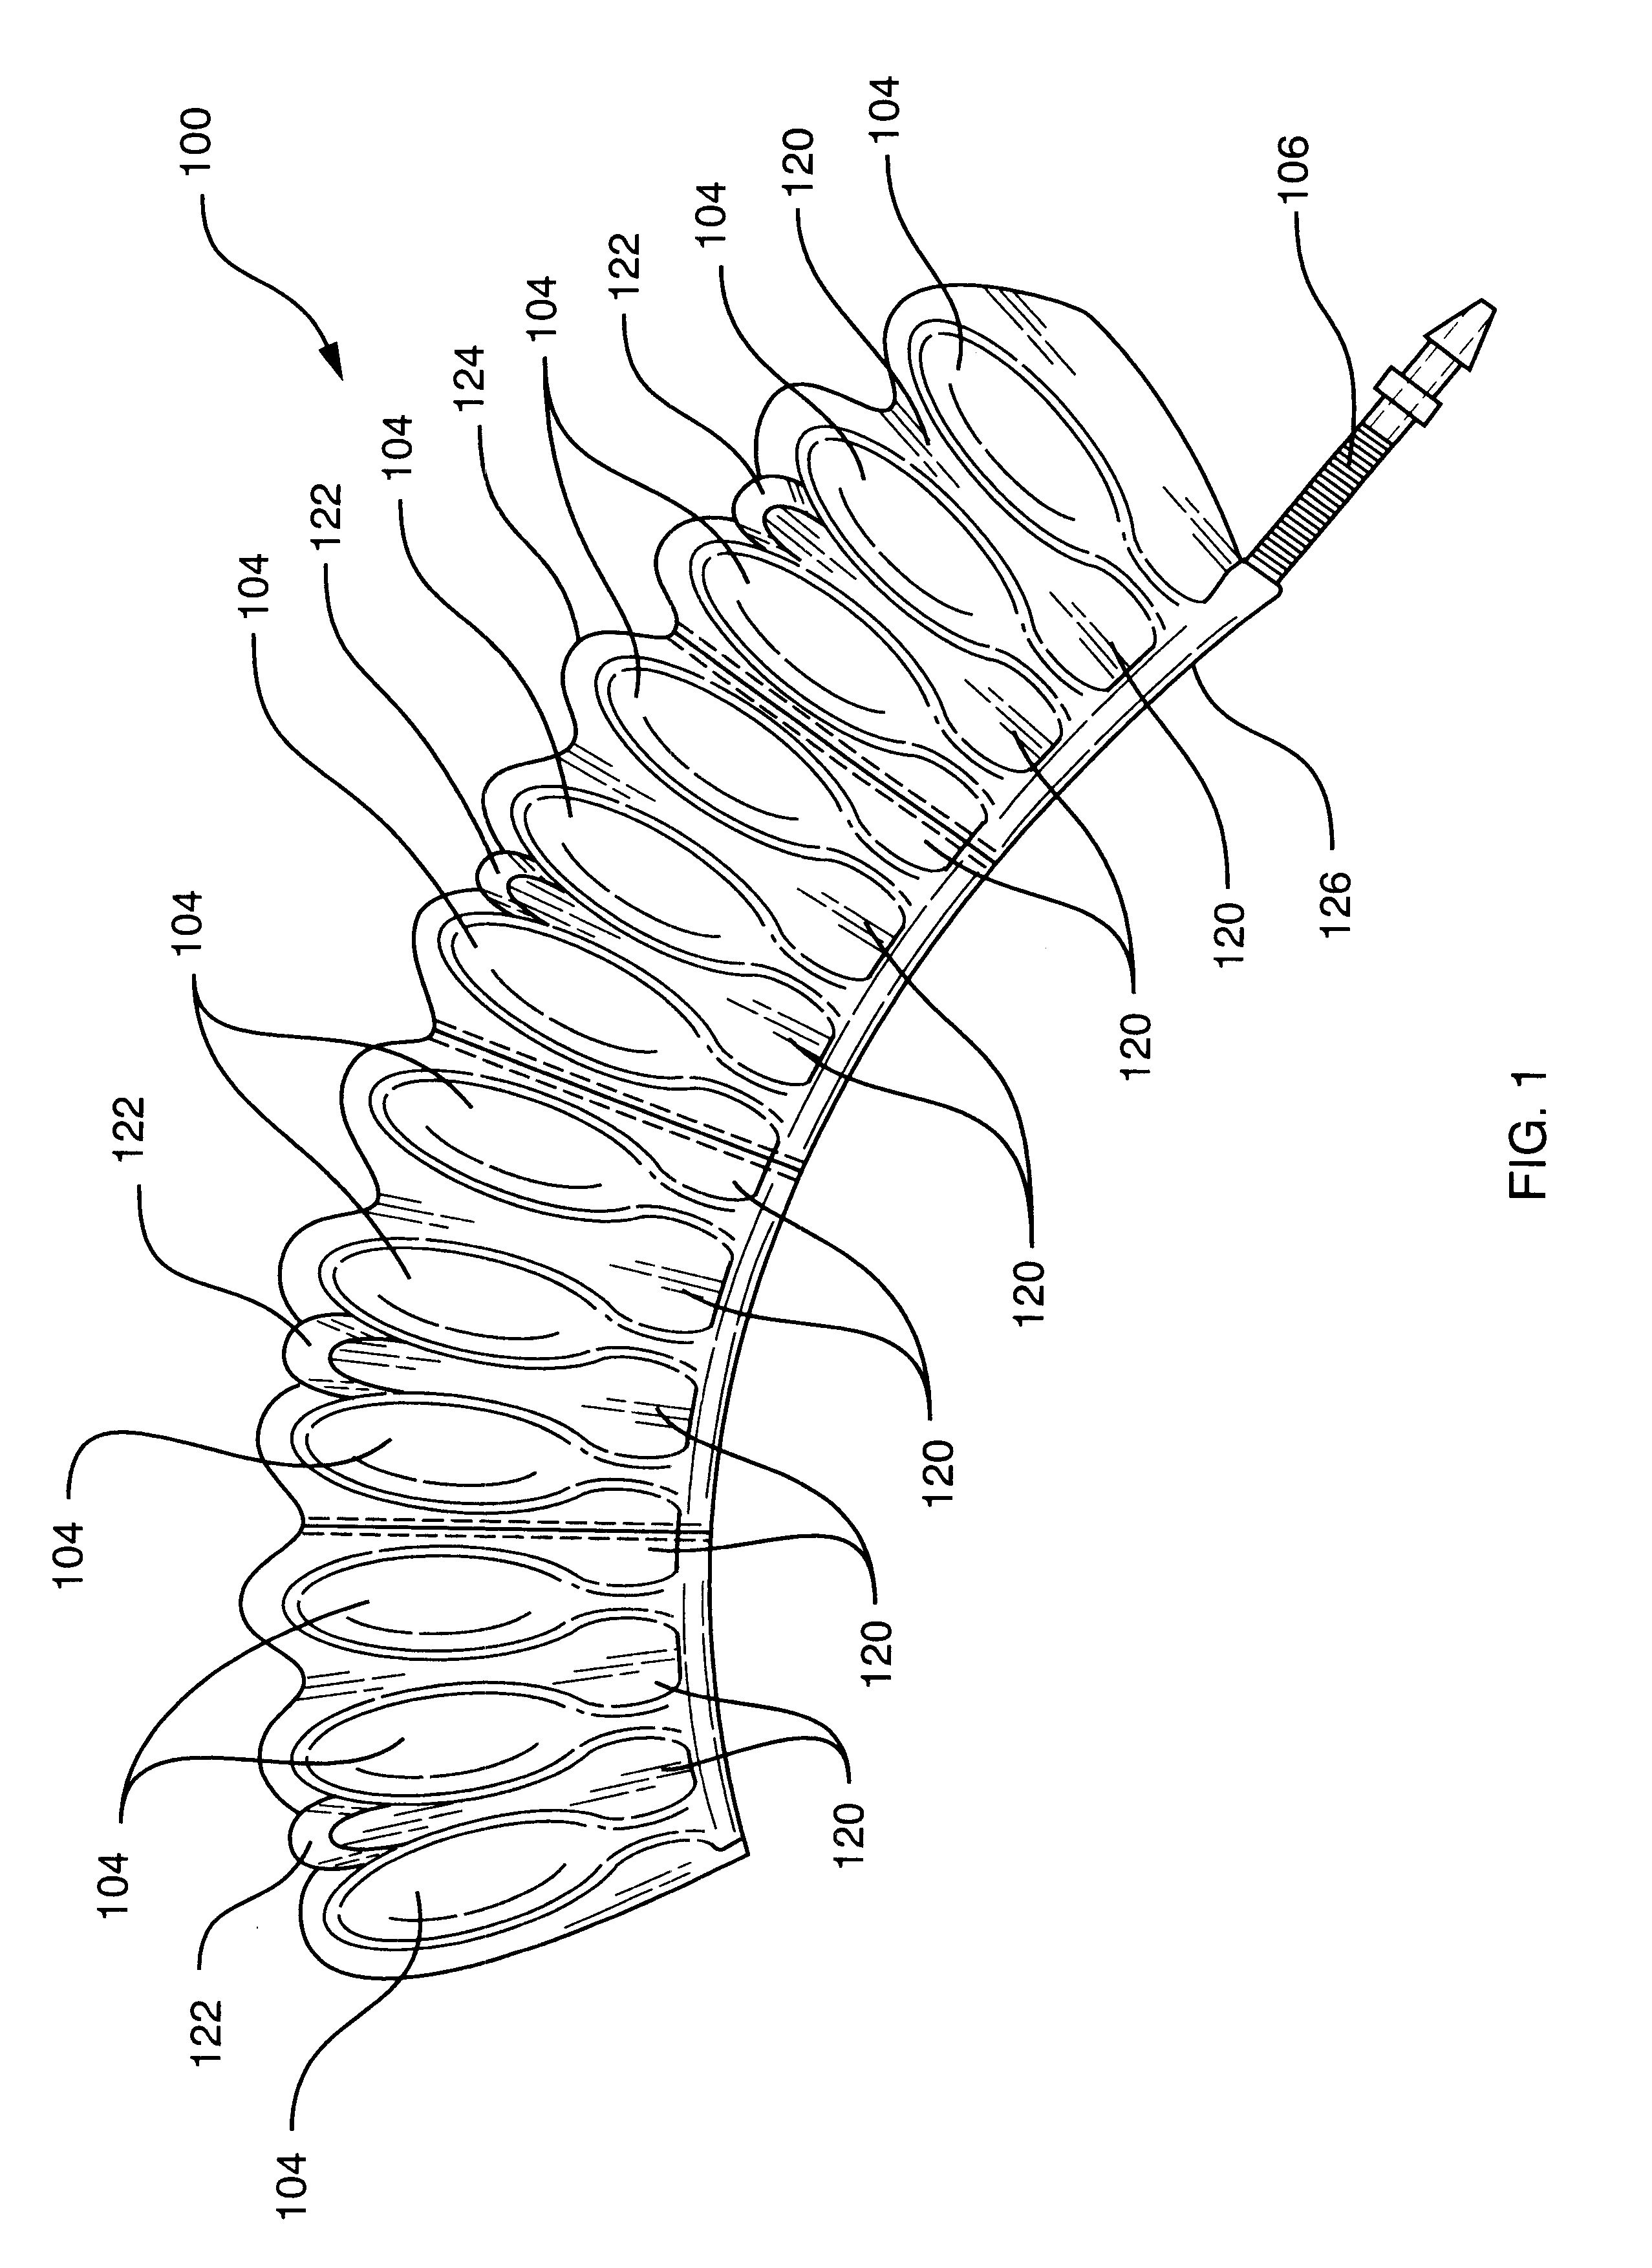 System and method for implanting a cardiac wrap